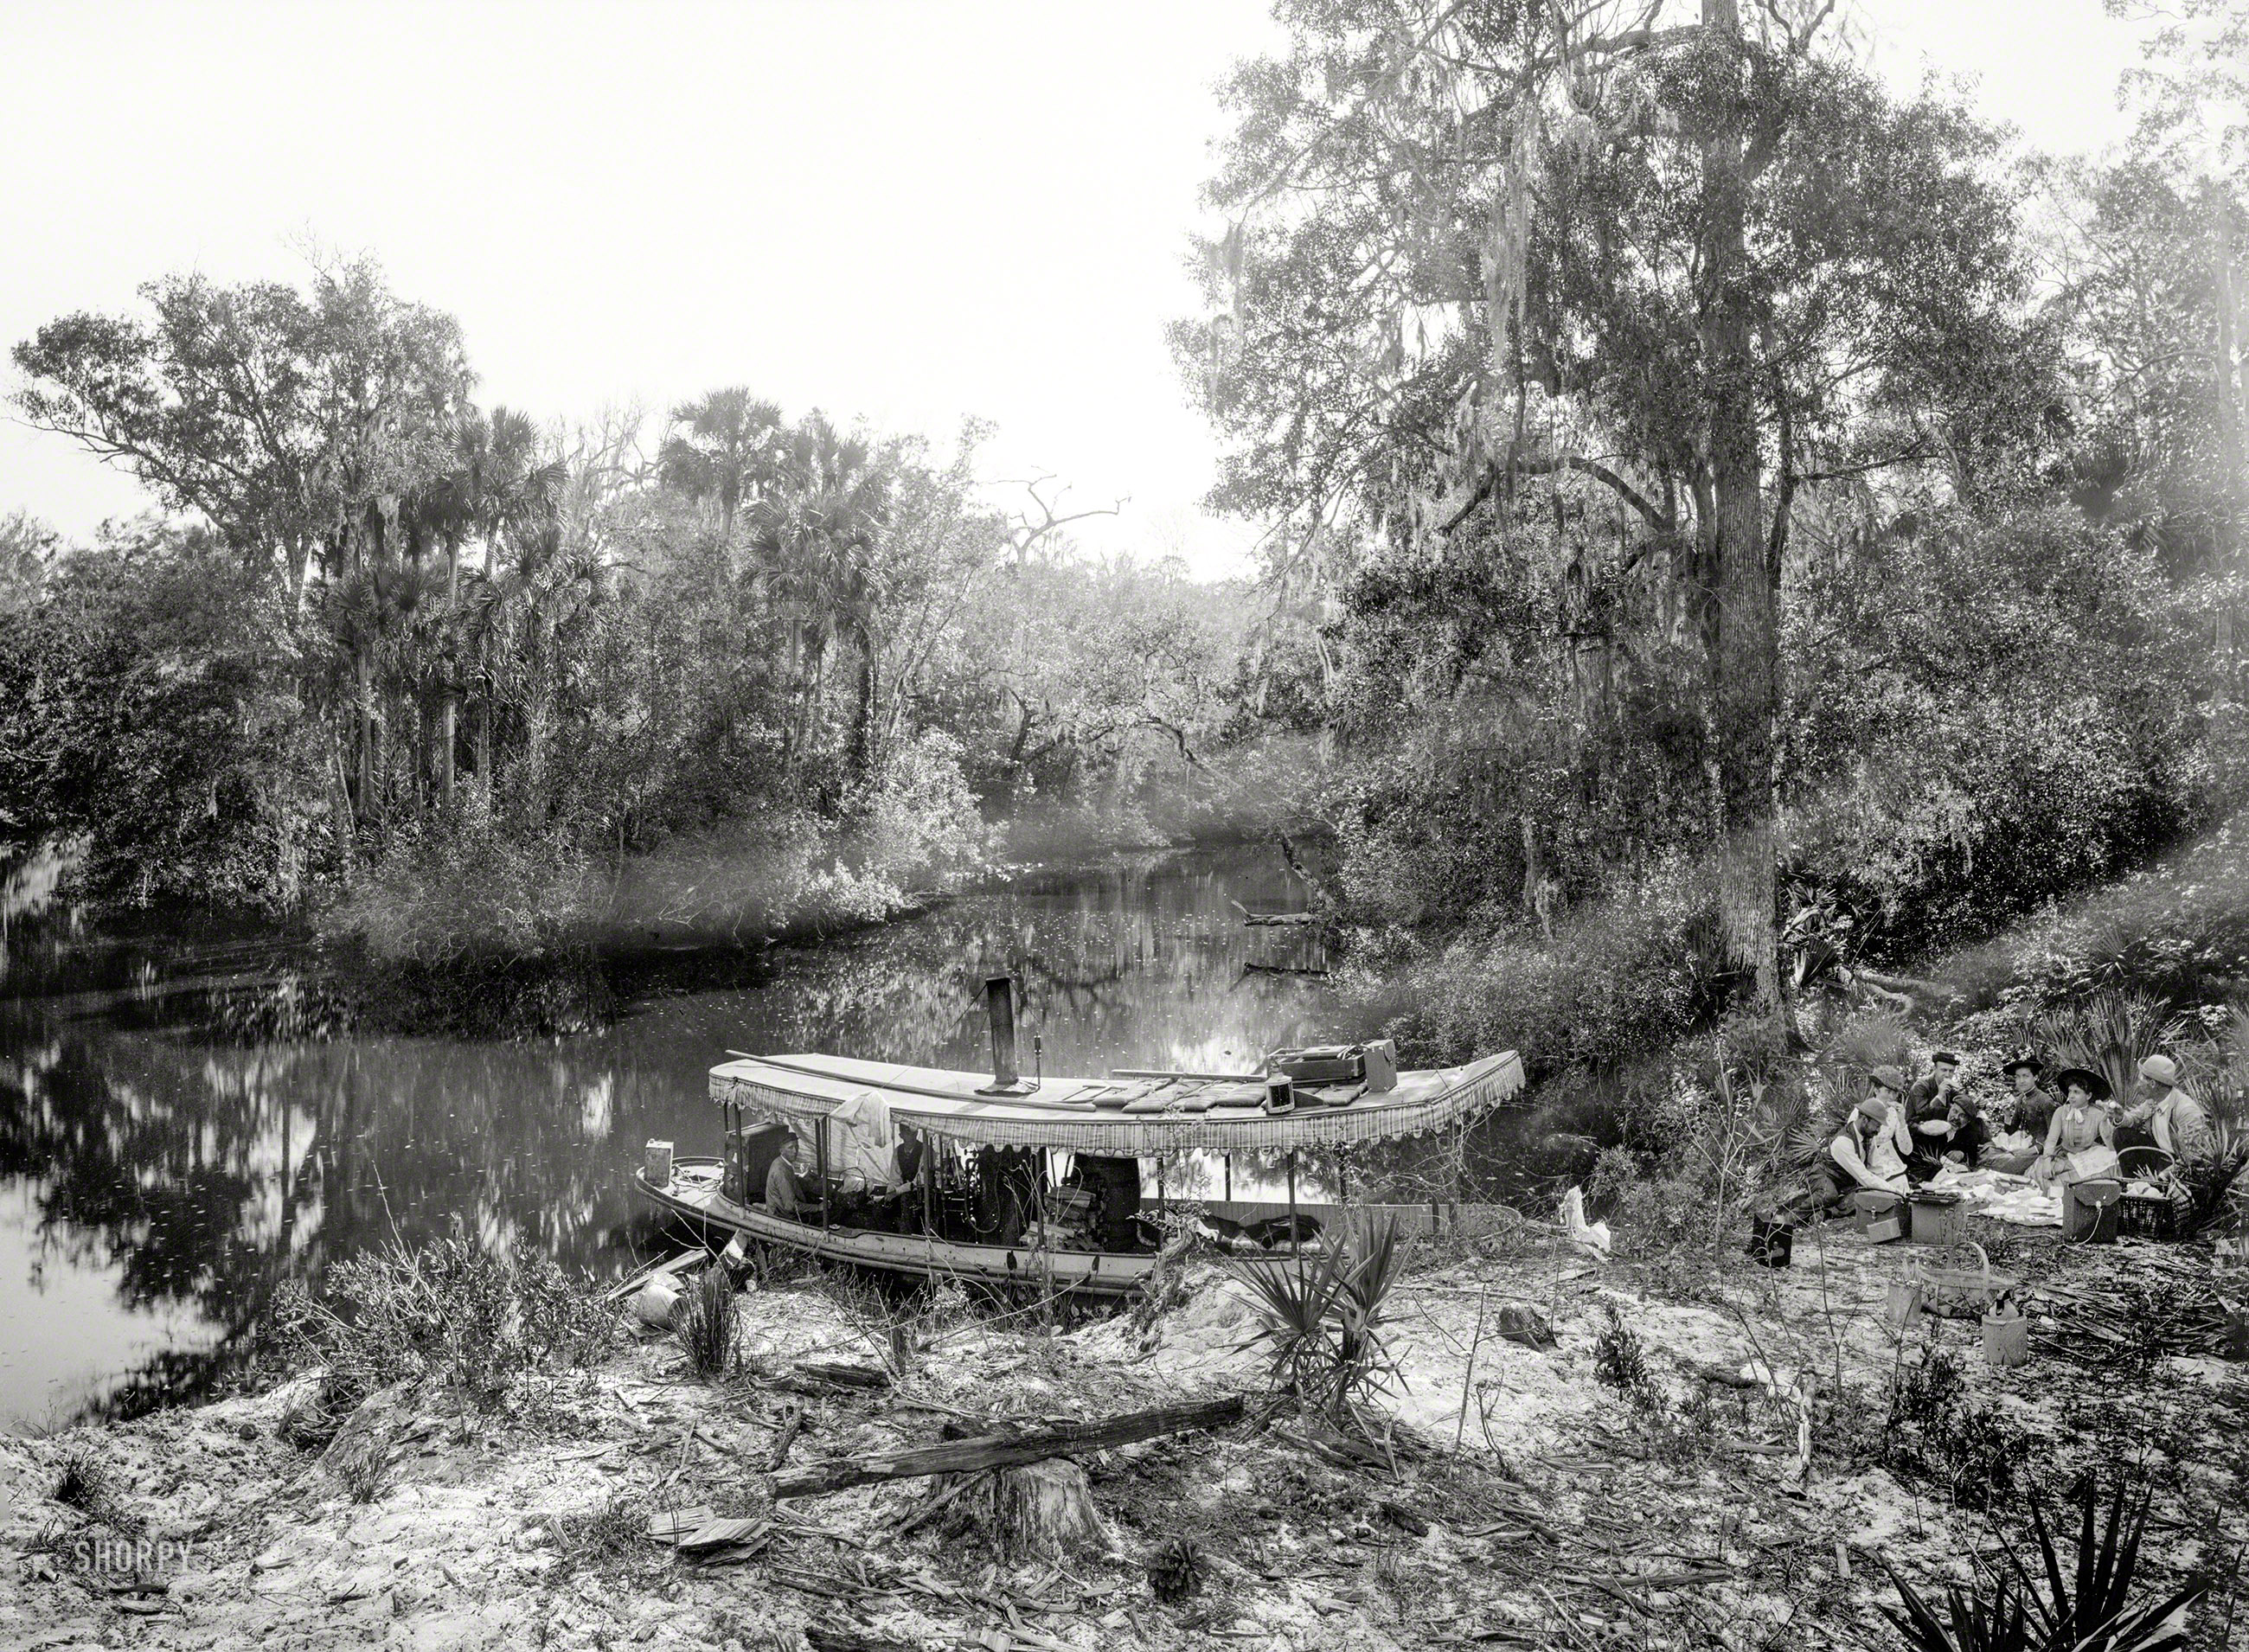 Volusia County, Florida, circa 1897. "Picnic landing on the Tomoka." With much photographic equipment strewn about, and a proffering of pie. 8x10 inch glass negative by William Henry Jackson, Detroit Photographic Co. View full size.